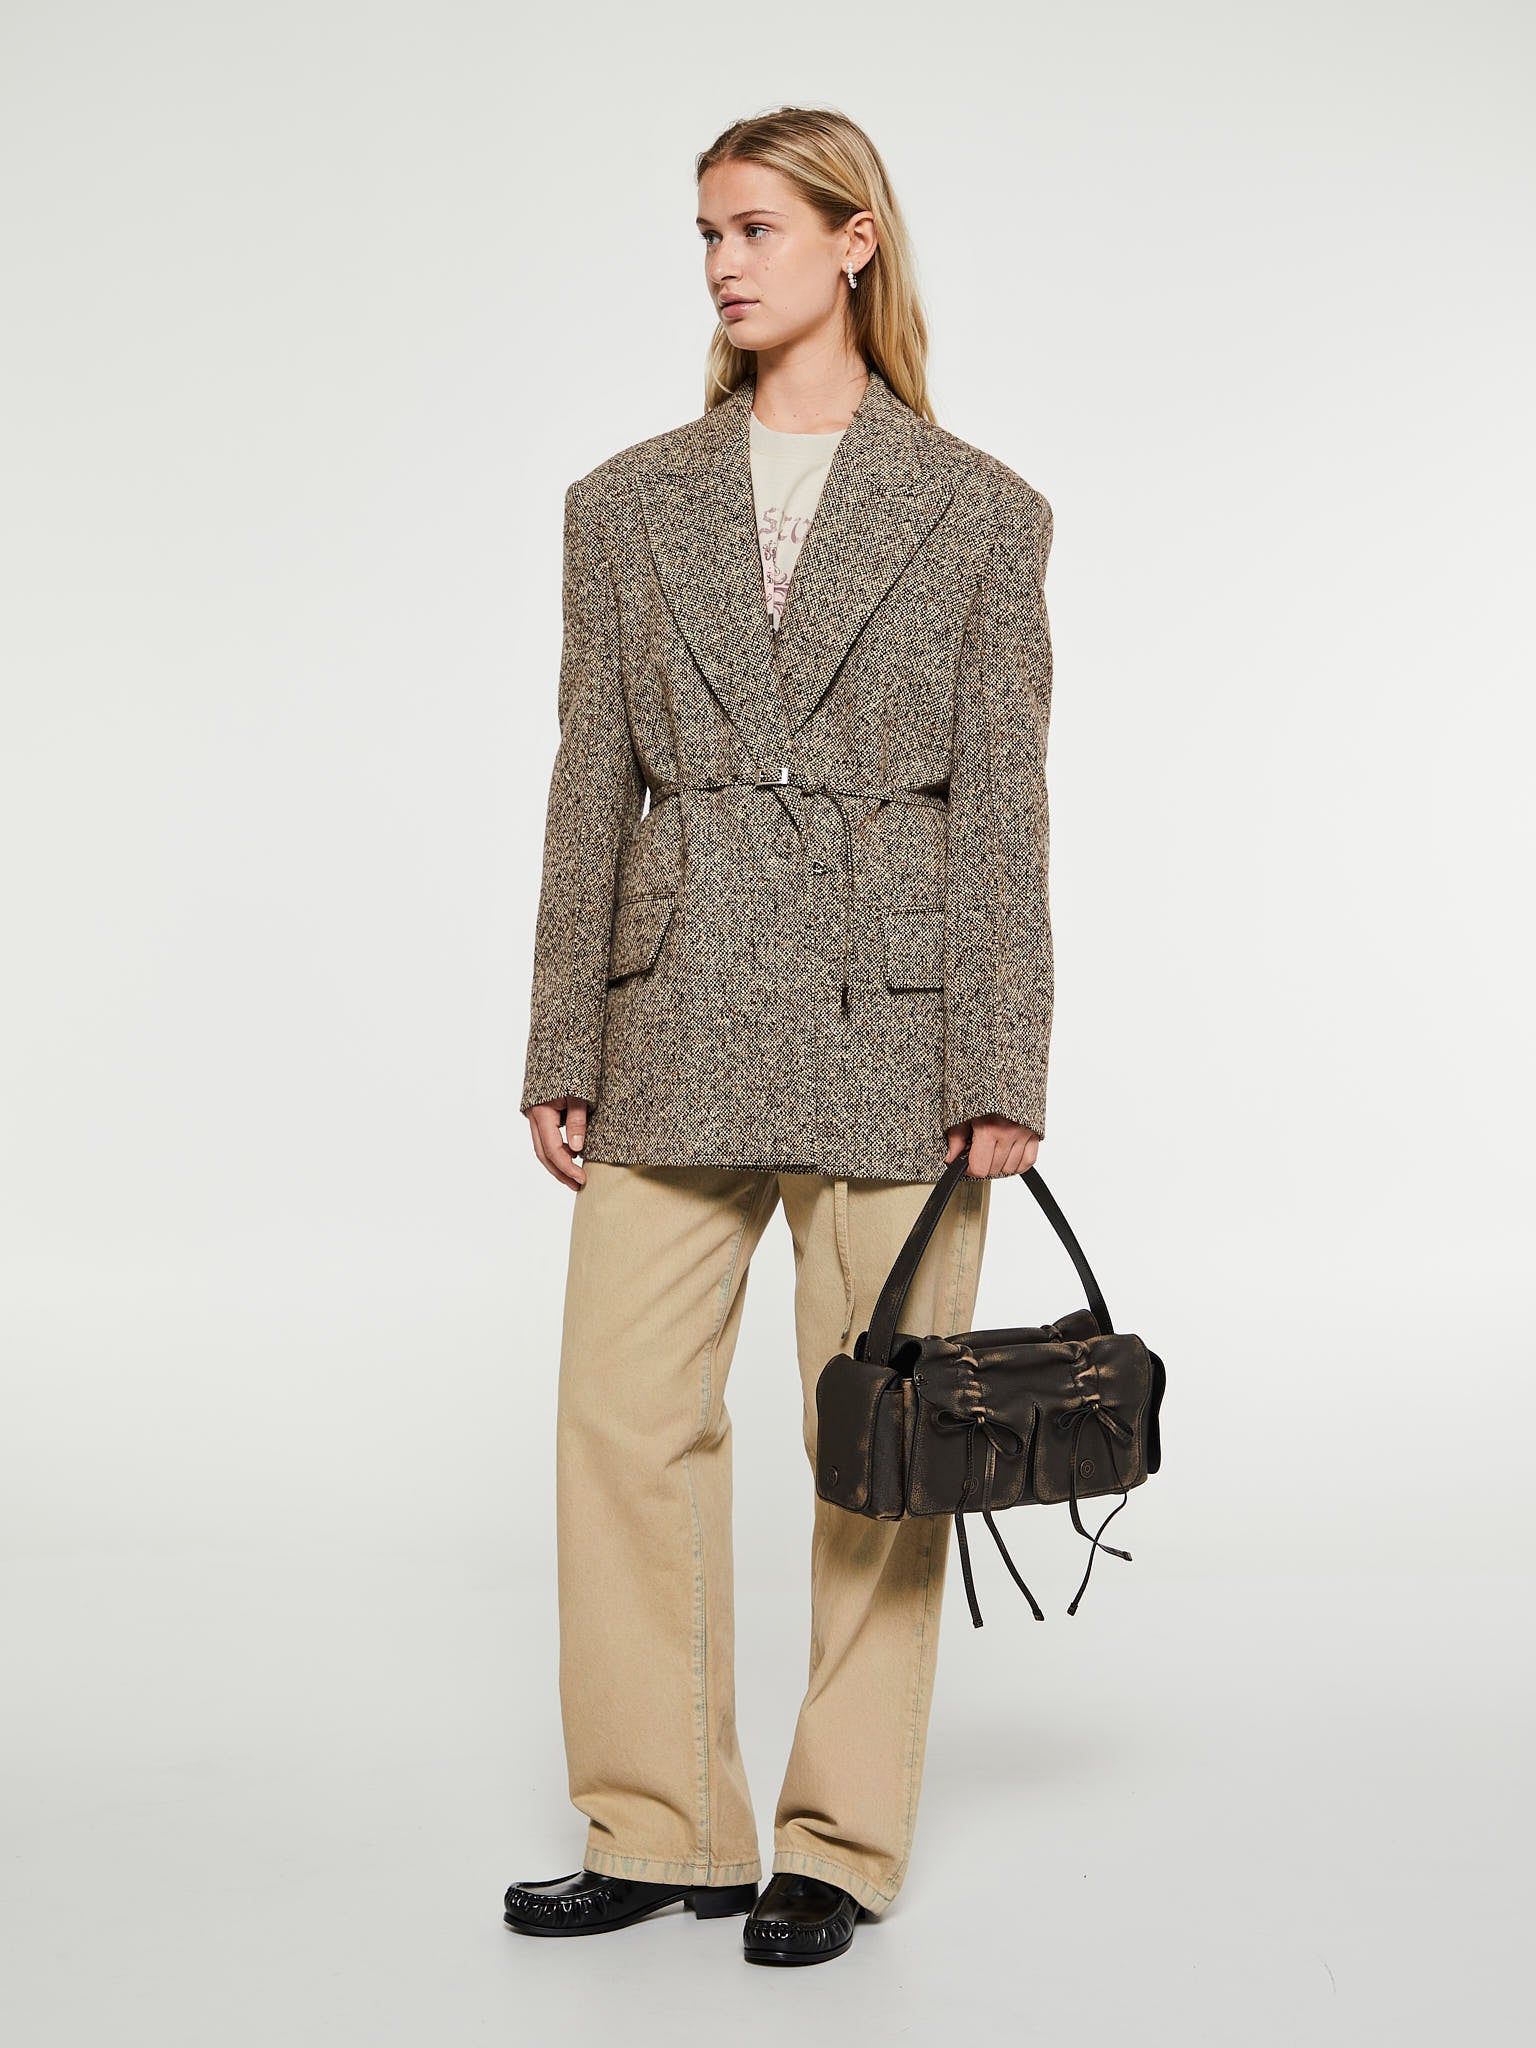 Single-Breasted Suit Jacket in Brown and Beige